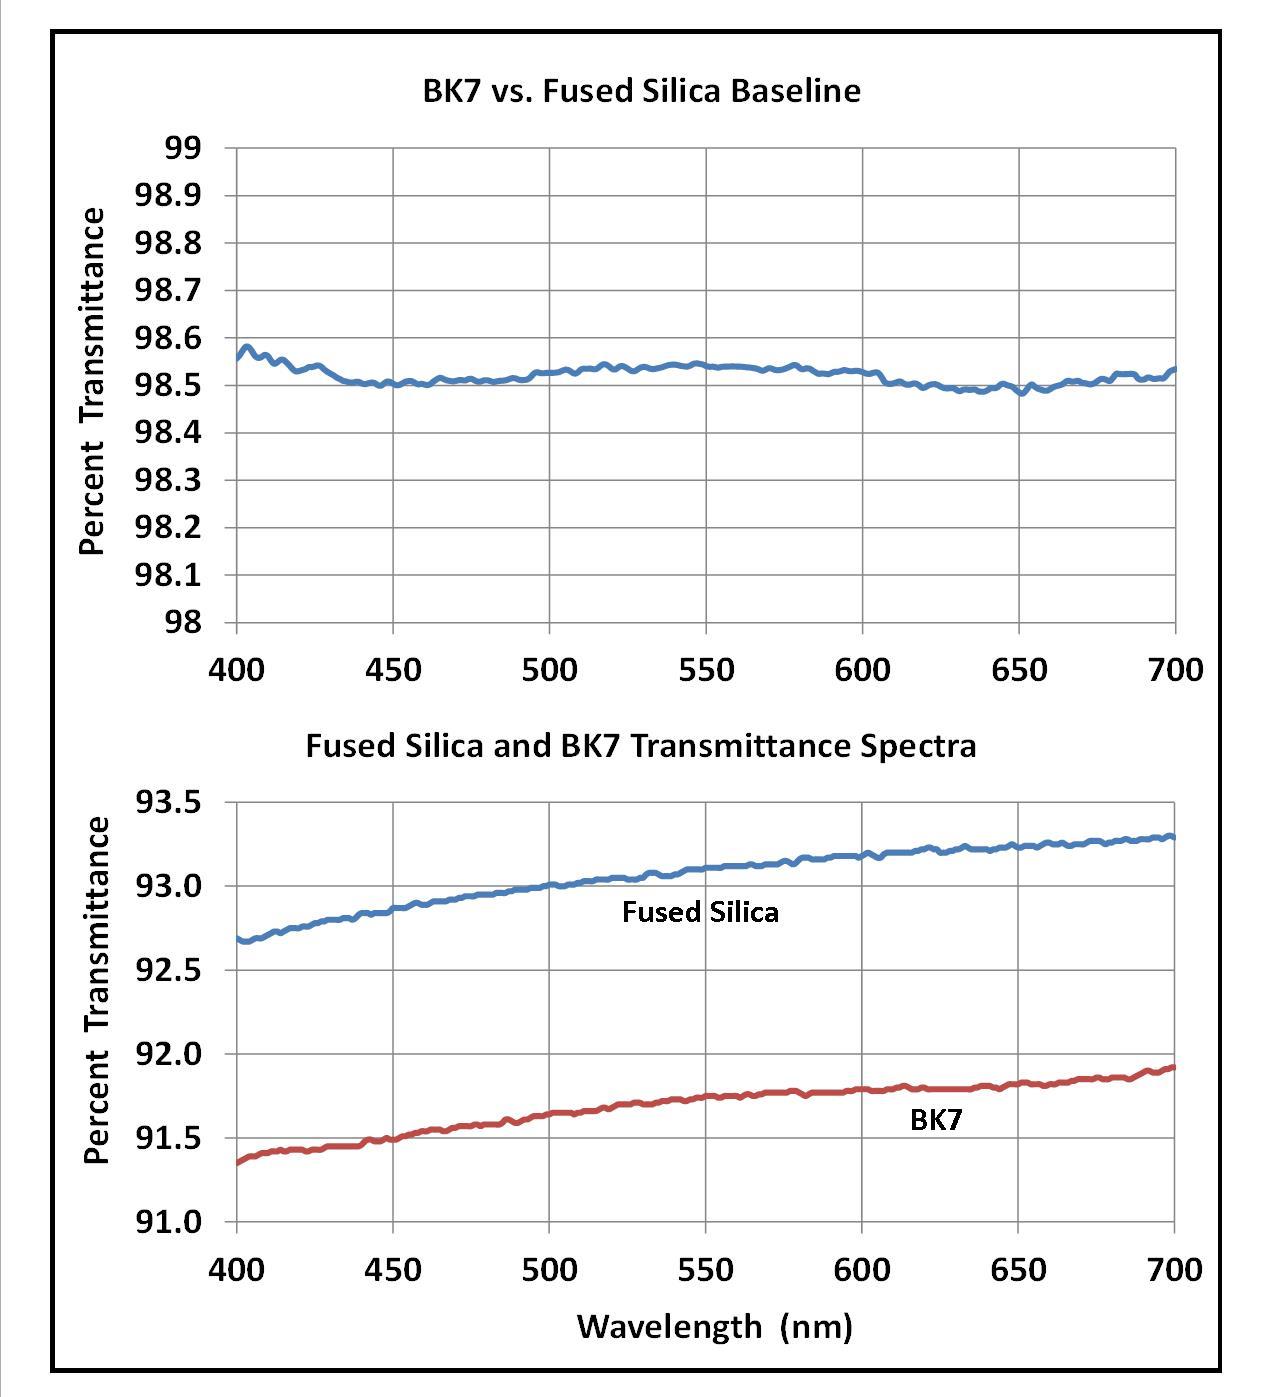 Transmission spectra of BK7 and fused silica